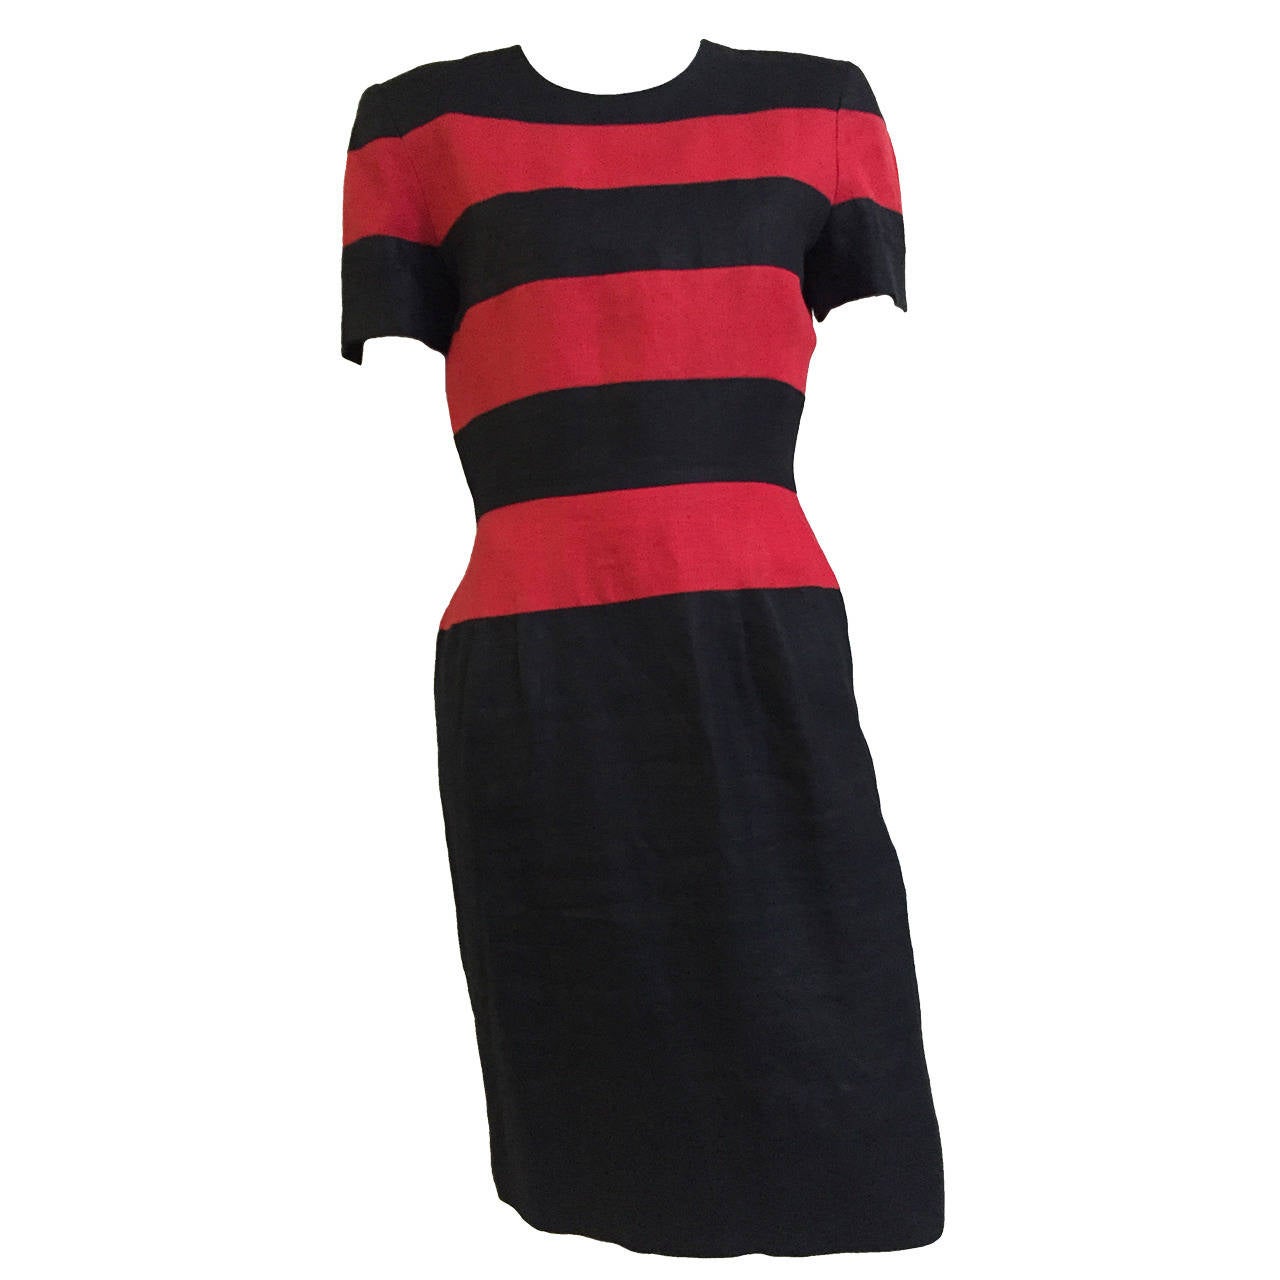 Scaasi Black and Red Linen Striped Sheath Dress, Size 6  im Angebot